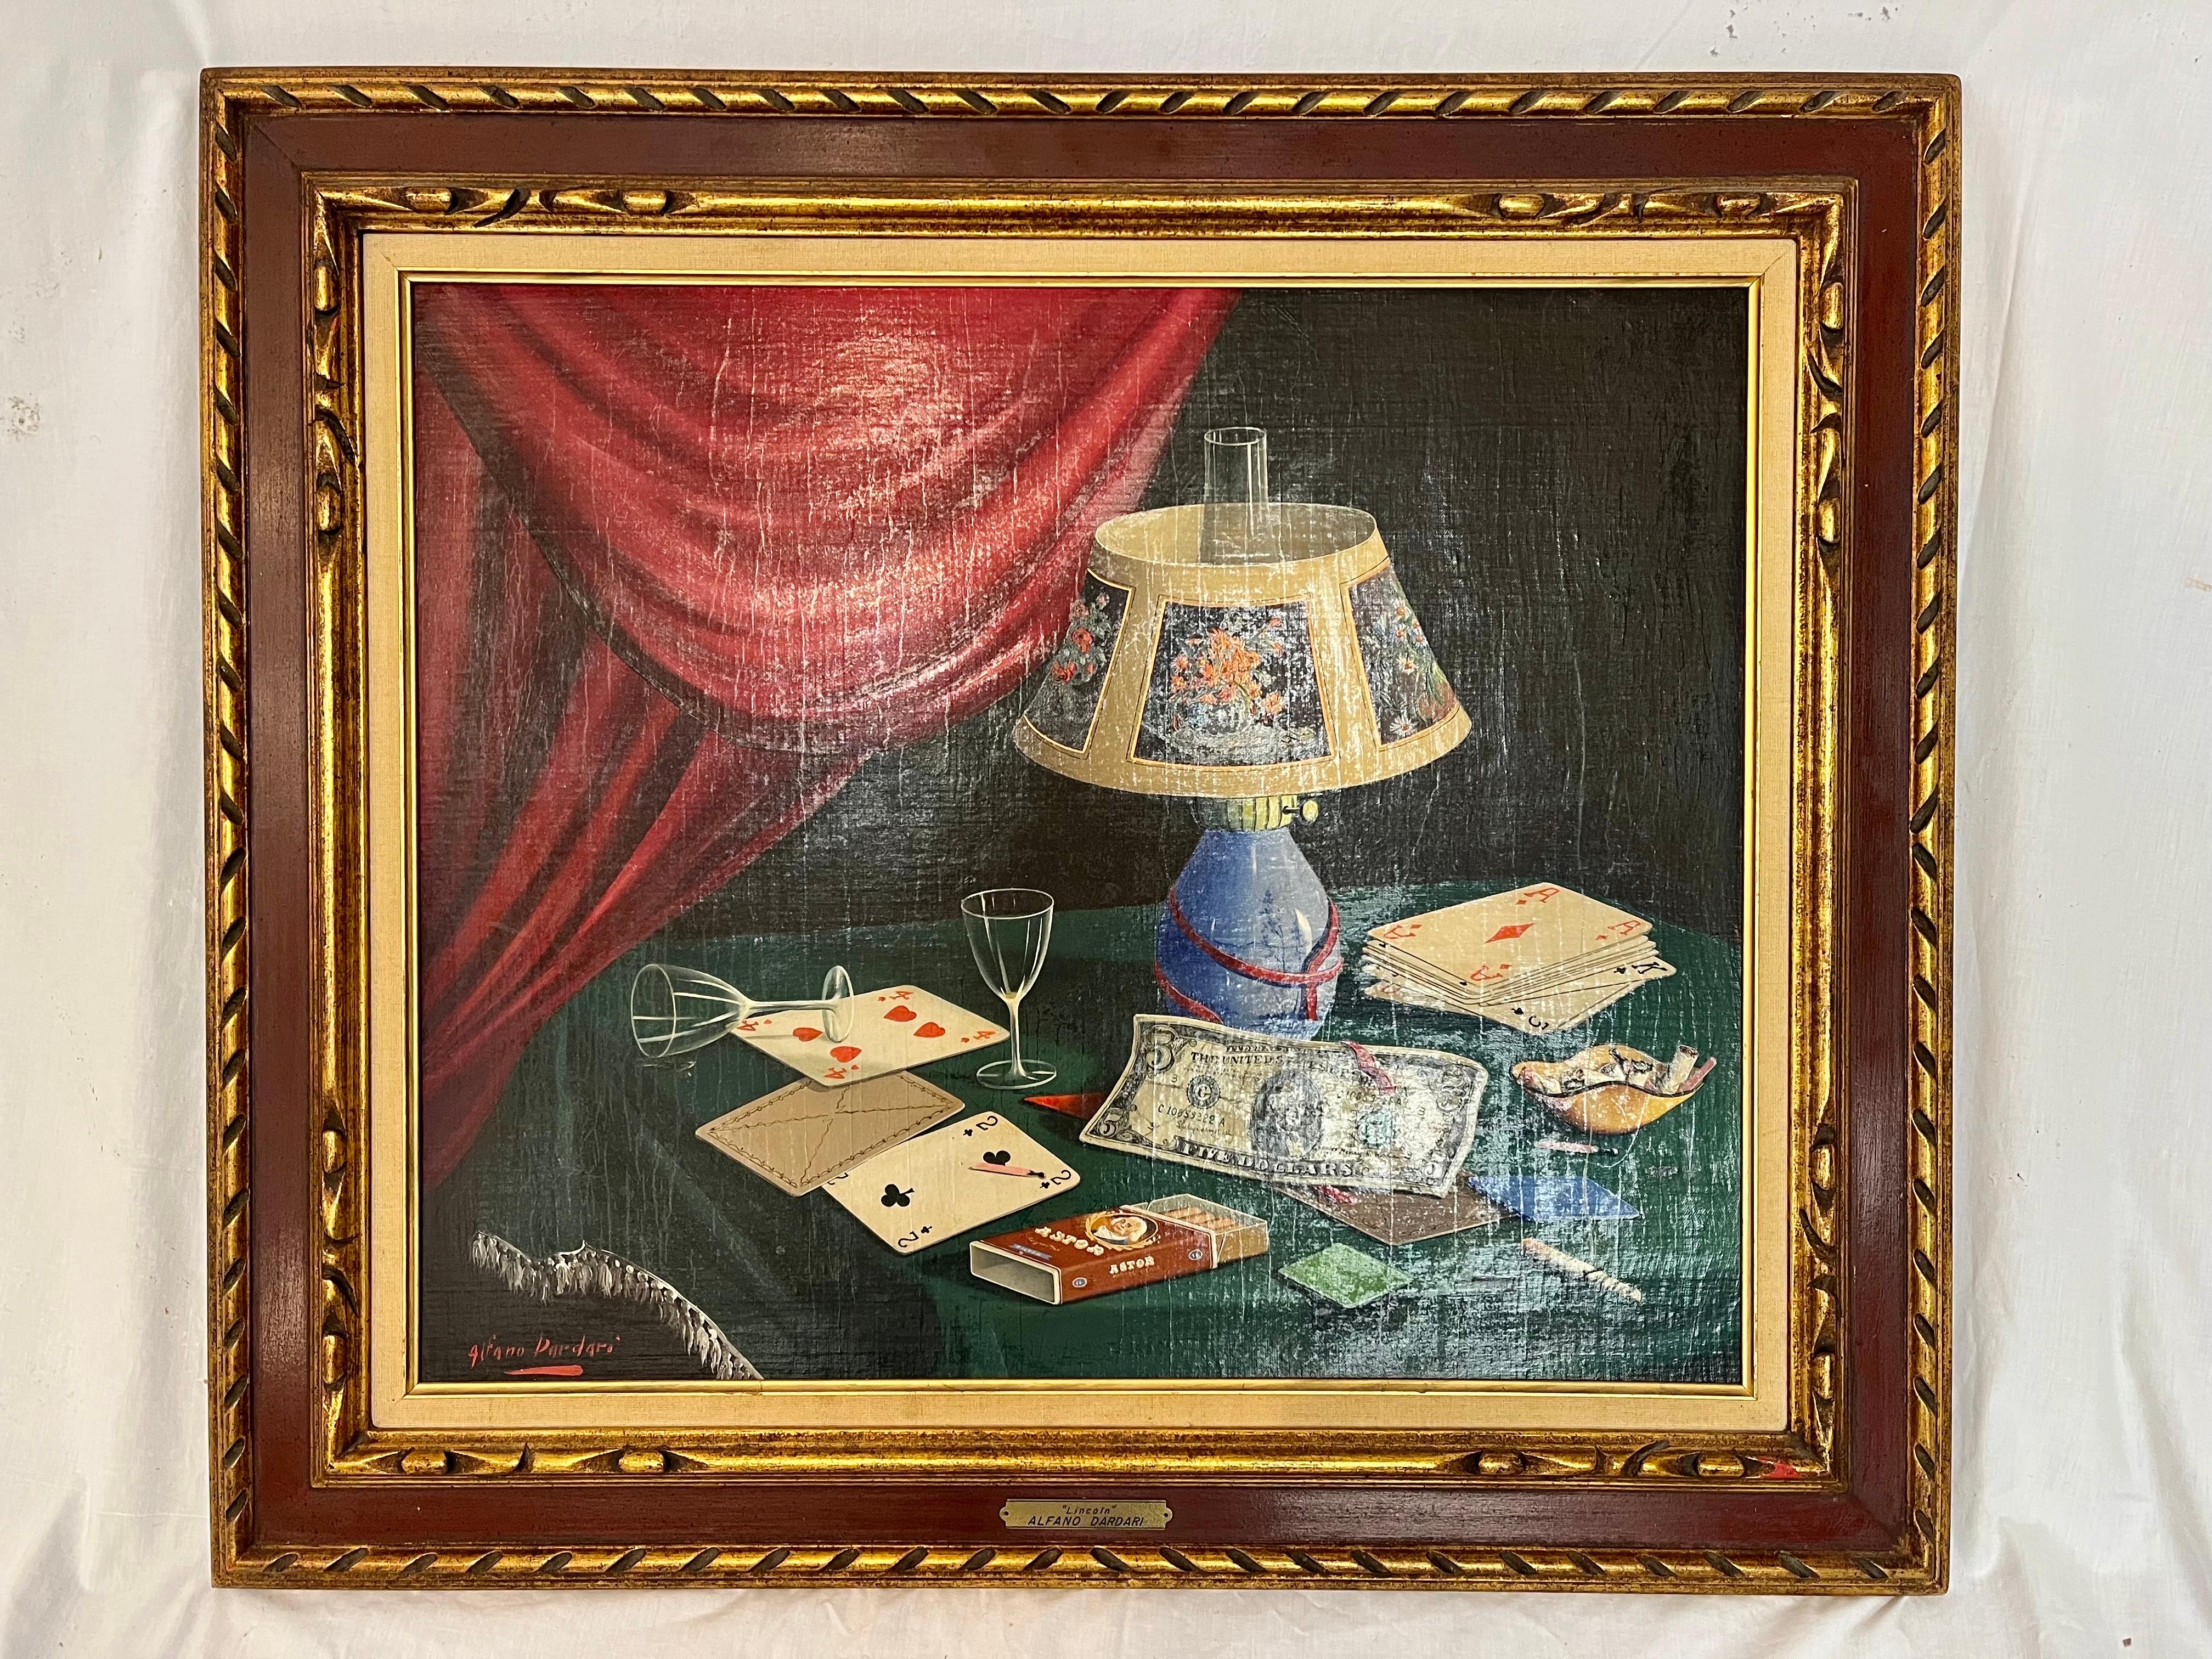 A stunning trompe l'oeil (fool the eye) mid 20th century Italian oil painting by artist Alfano Dardari. This work depicts the after effects of a late night. Gambling. Drinking. Smoking. Vice. And do you see a thread through all of this? I do. Mind